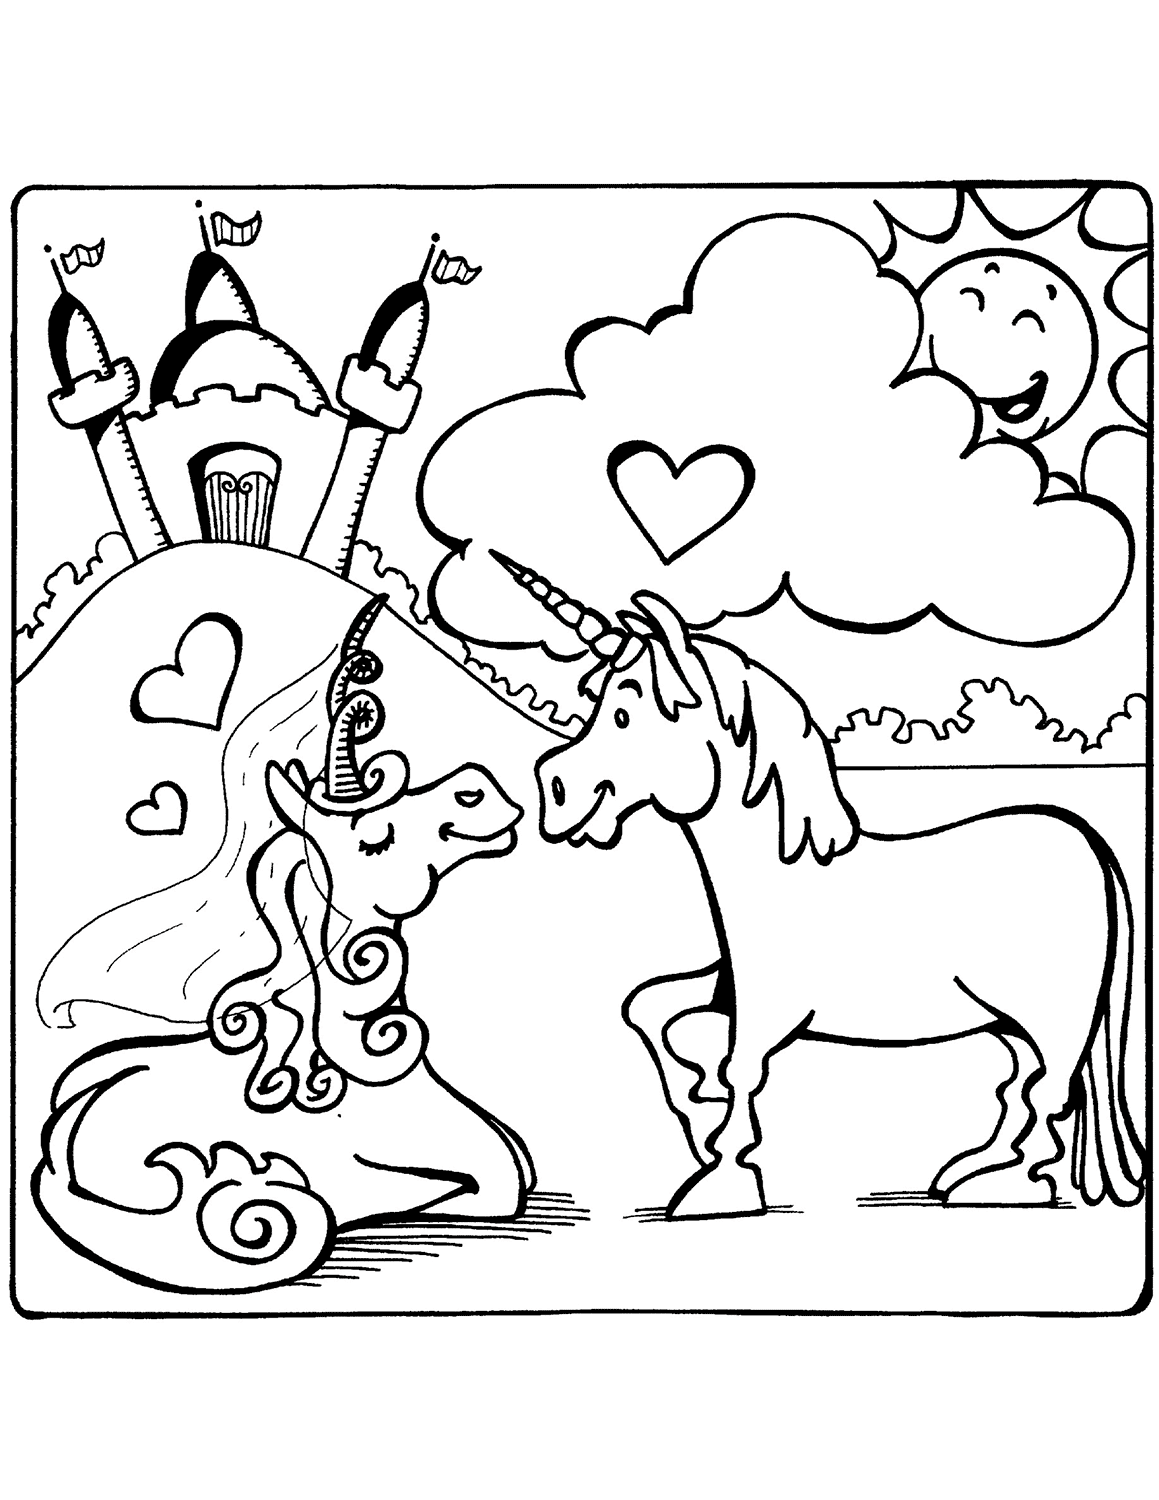 Unicorns In Love Coloring Page